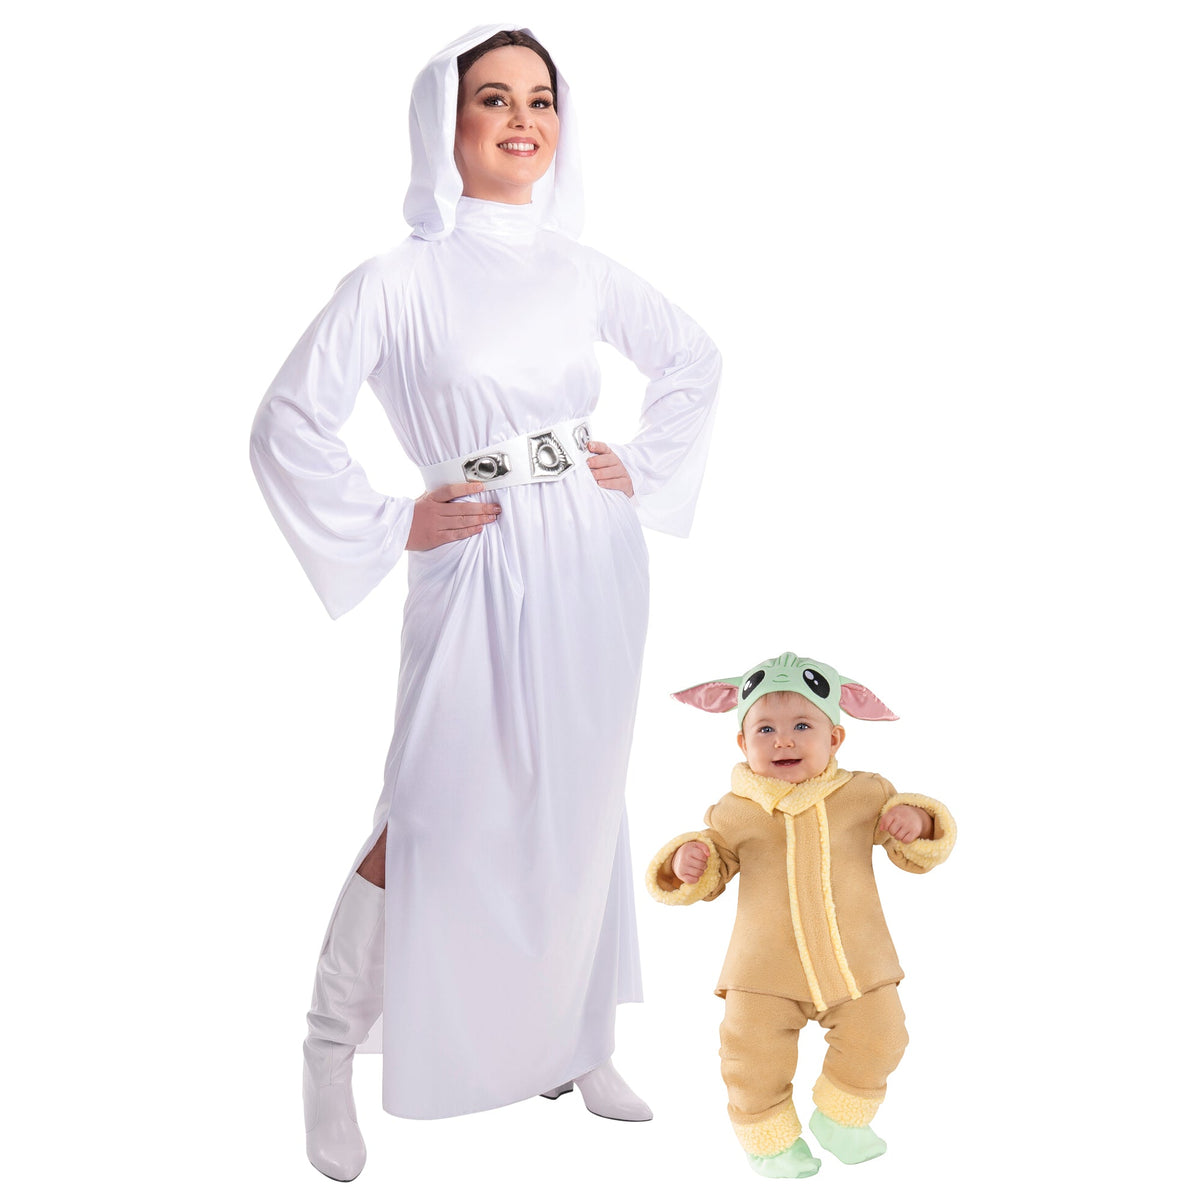 Party Expert Mommy and Me Star Wars Costumes 715362323